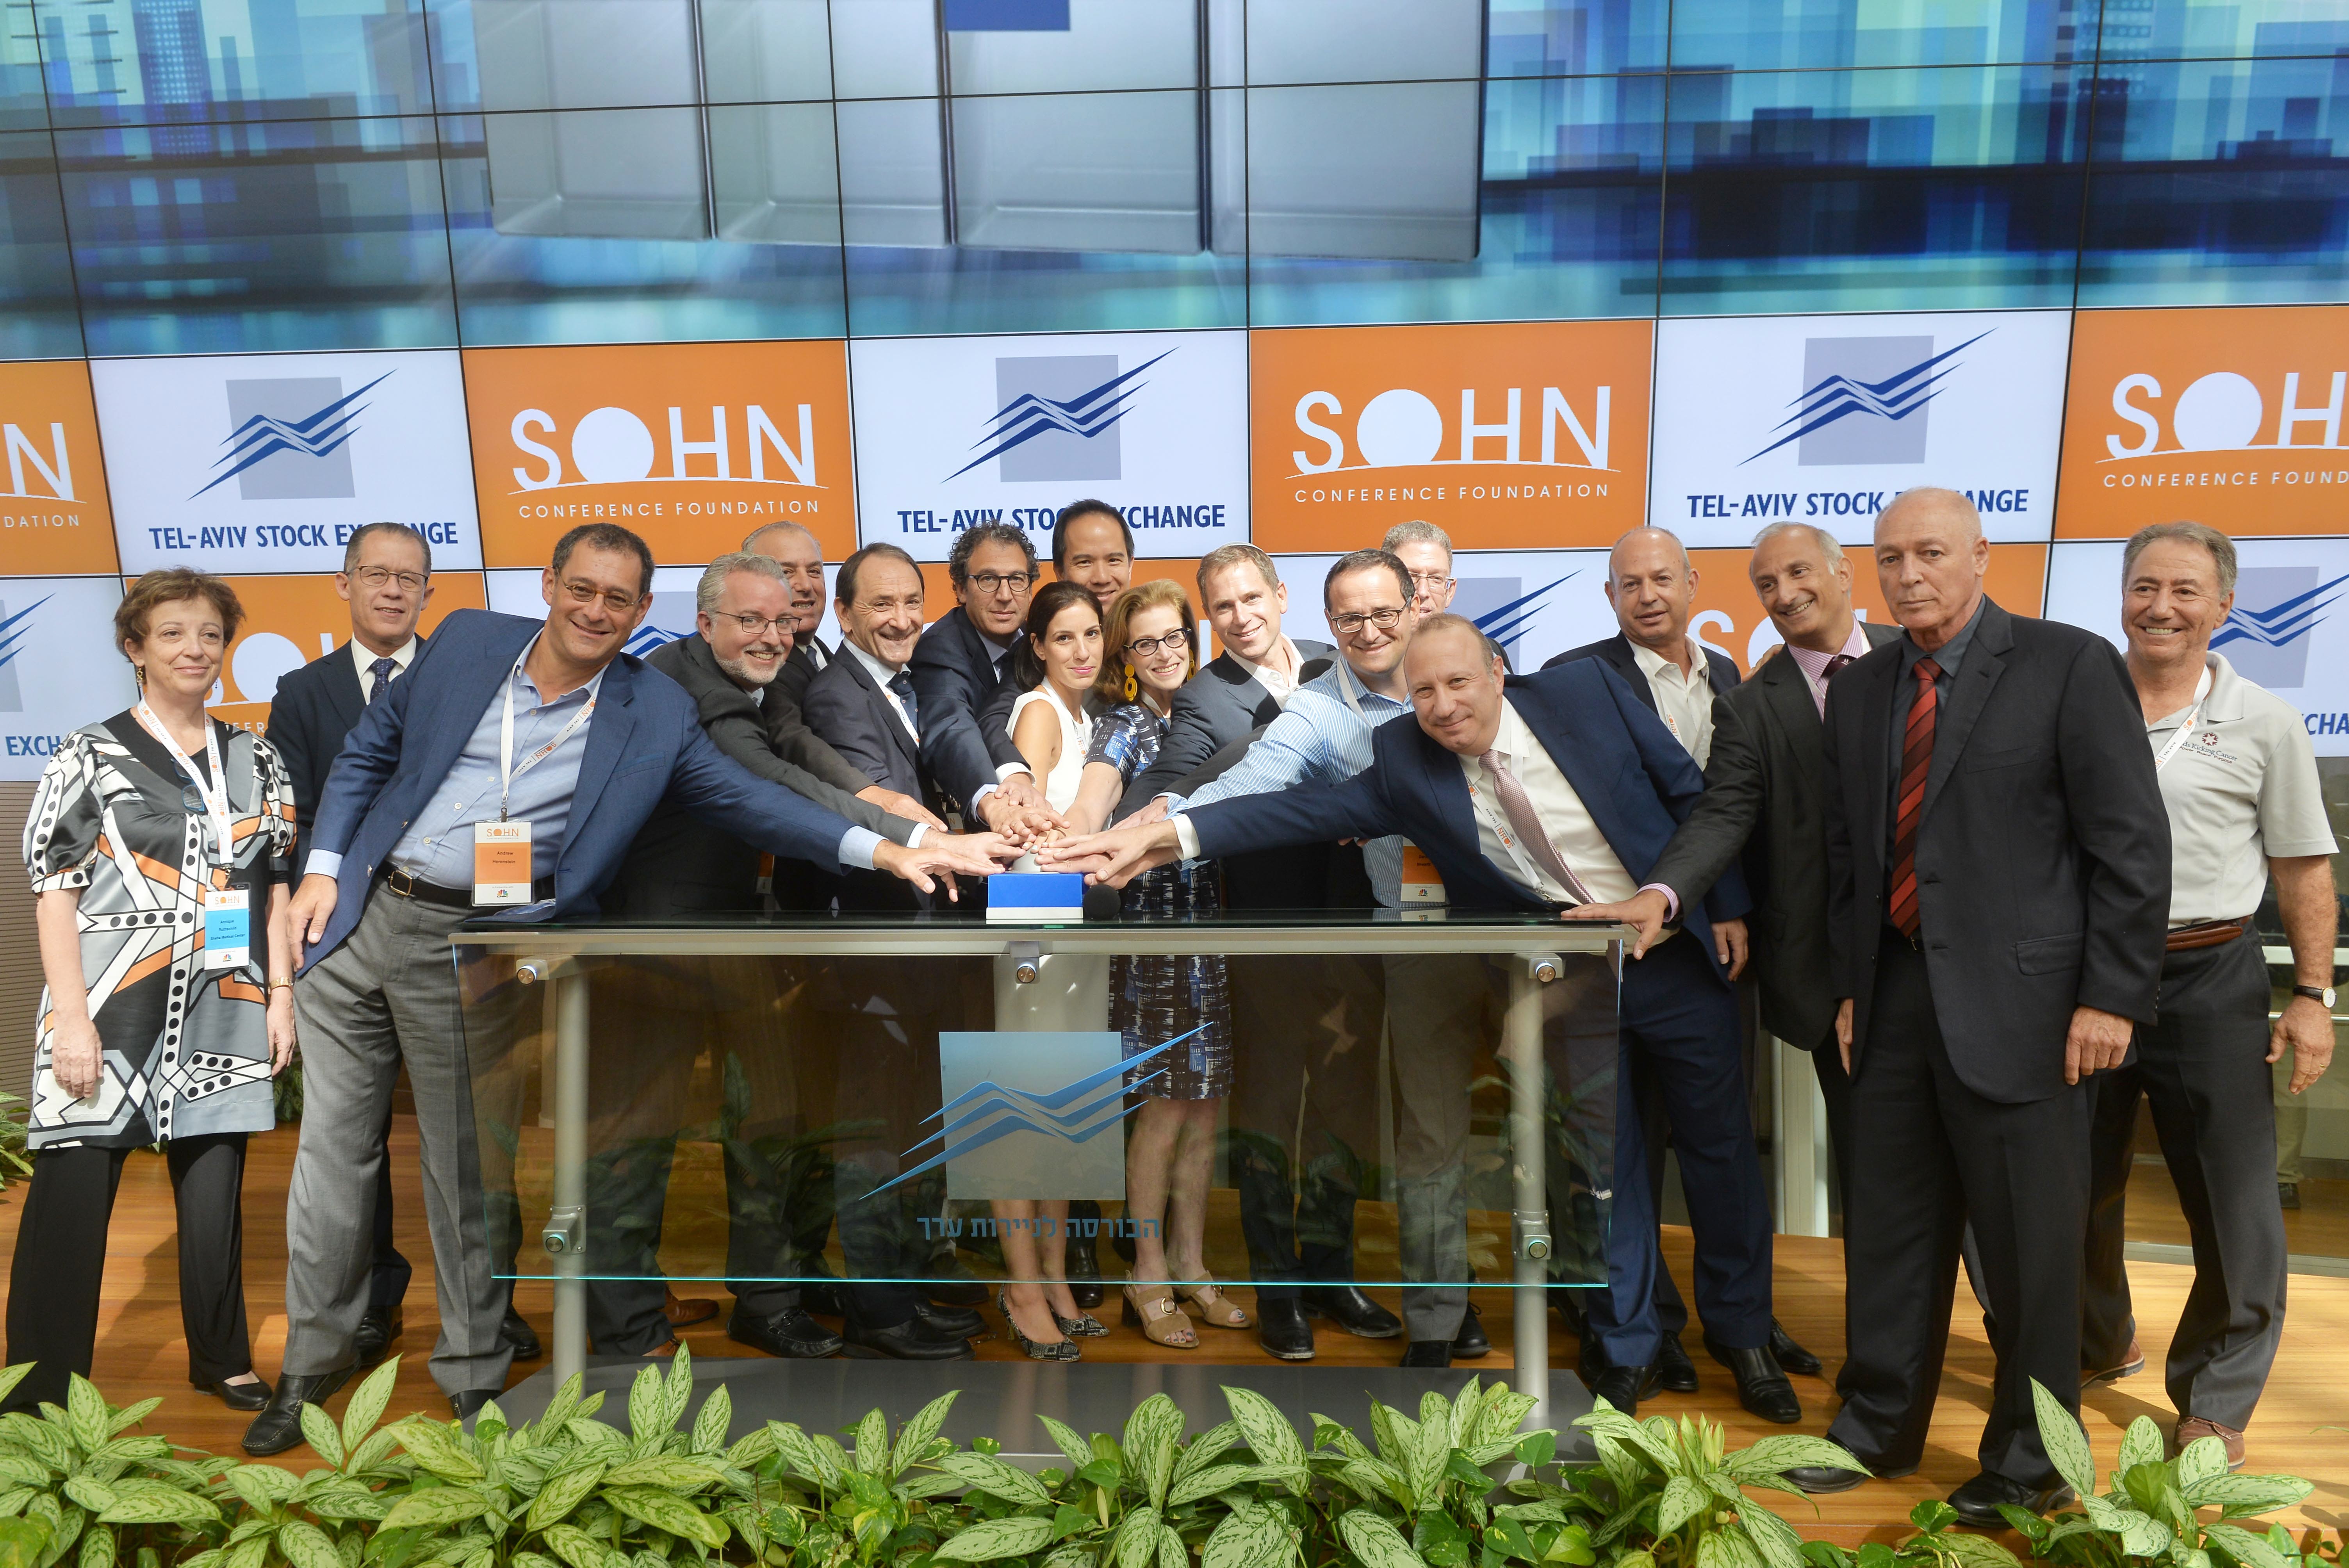 The Sohn Investment Conference, Which is Taking Place for the third Time in Israel, was launched in TASE's Opening Bell Ceremony